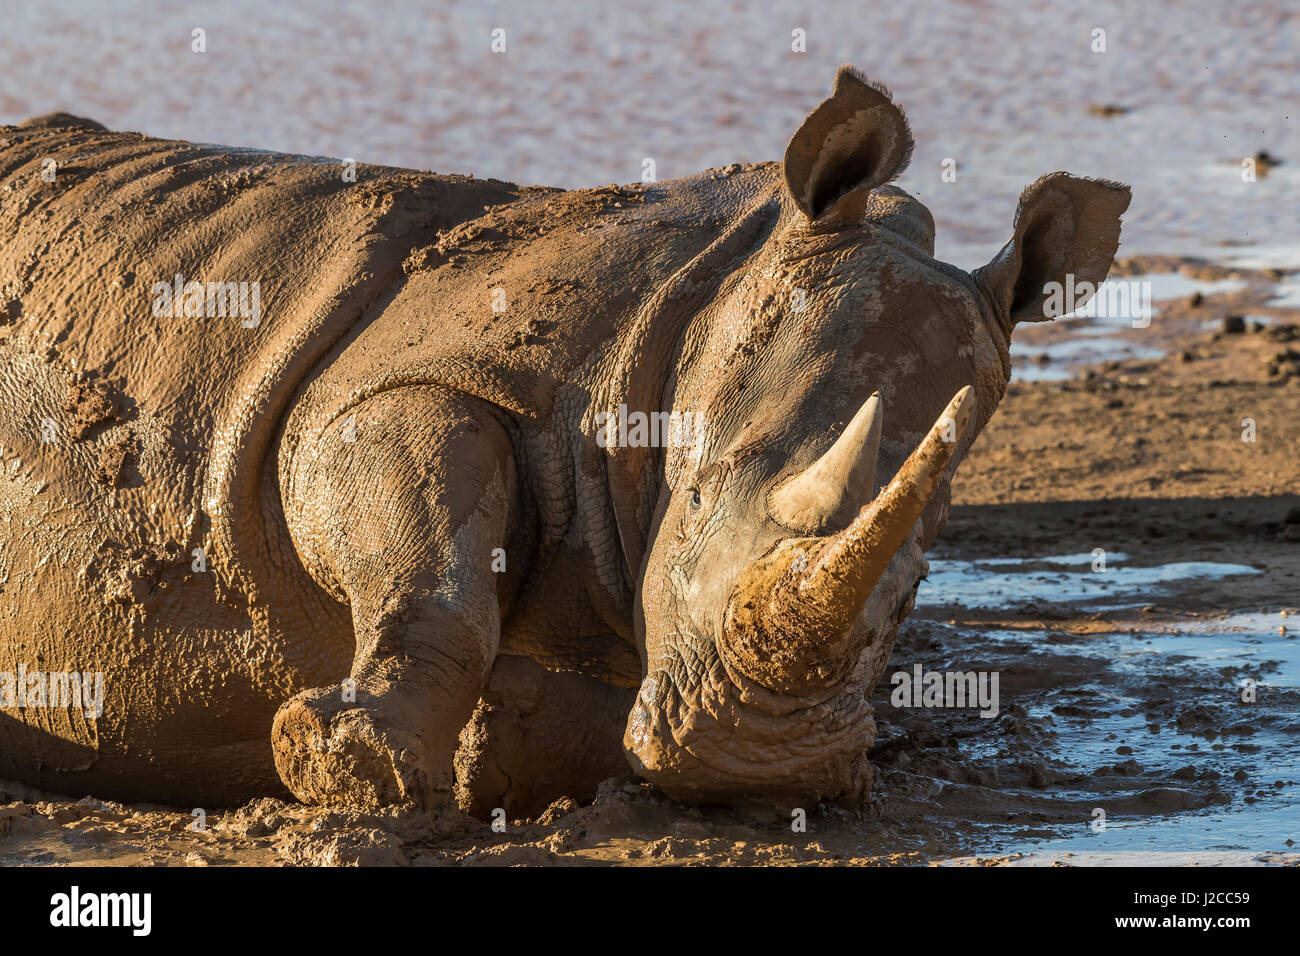 Square-lipped rhinoceros (Ceratotherium simum) wallowing in mud, Aquila Private Game Reserve, Western Cape, South Africa Stock Photo